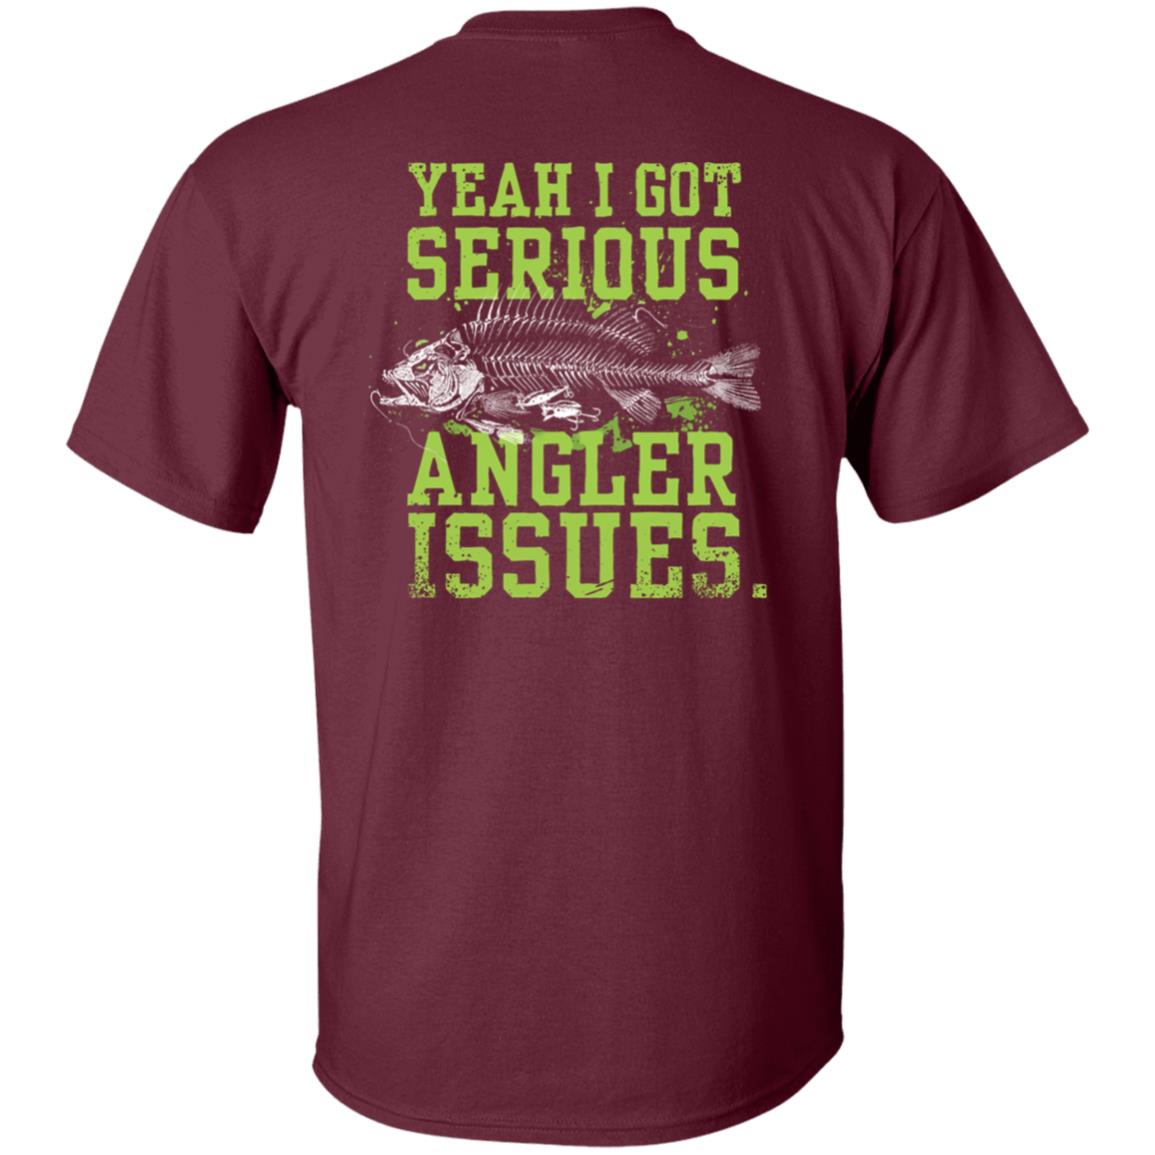 Yeah I Got Serious Angler Issues Shirt Jenny Nicholson Buck Wear Serious Angler Issues Shirt